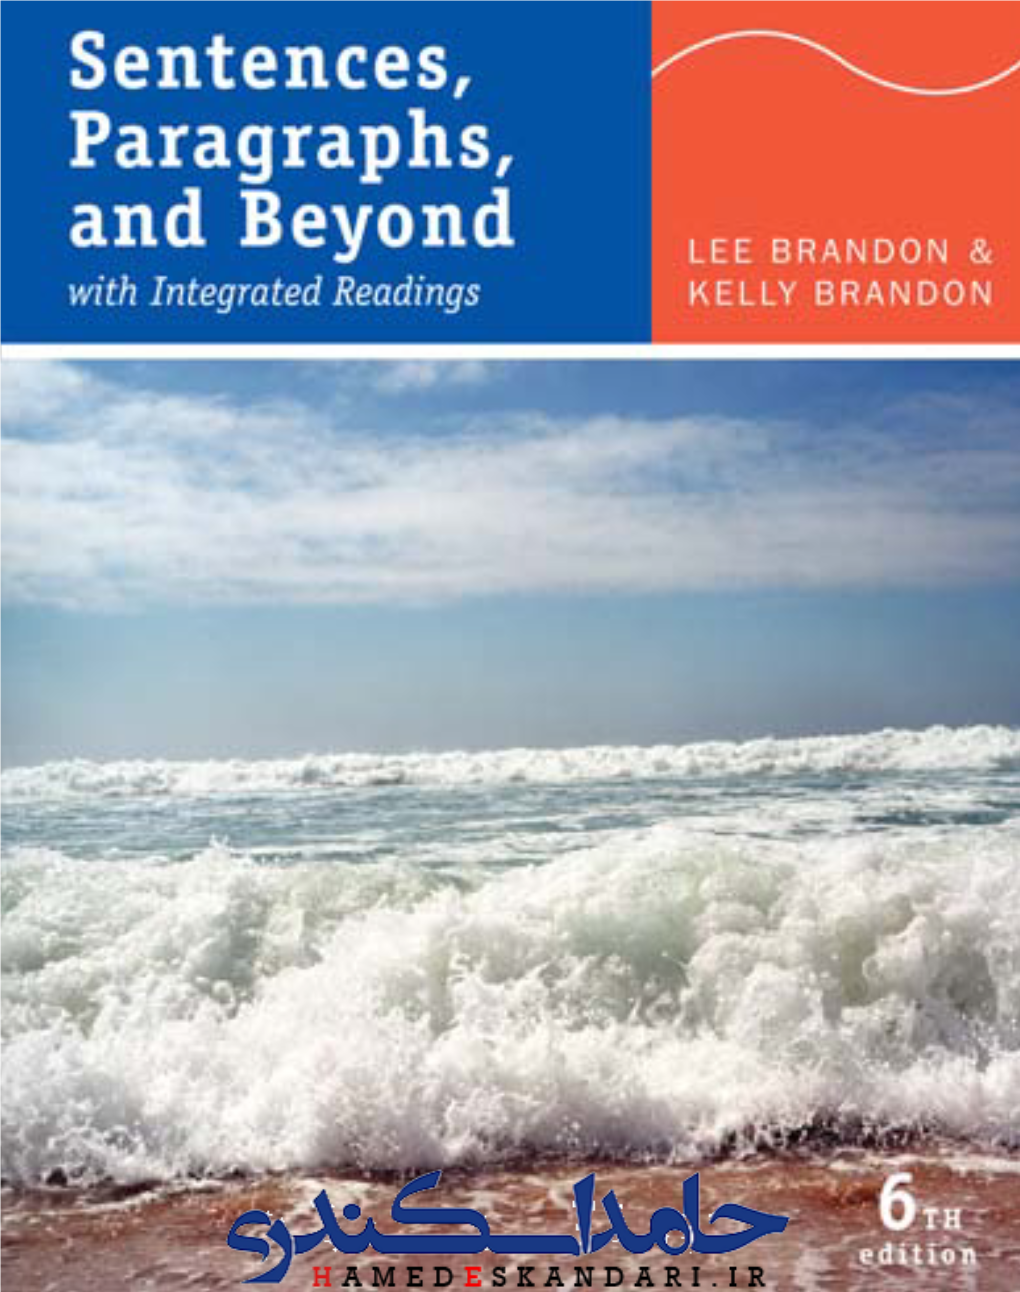 Sentences, Paragraphs, and Beyond: with Integrated Readings, Sixth